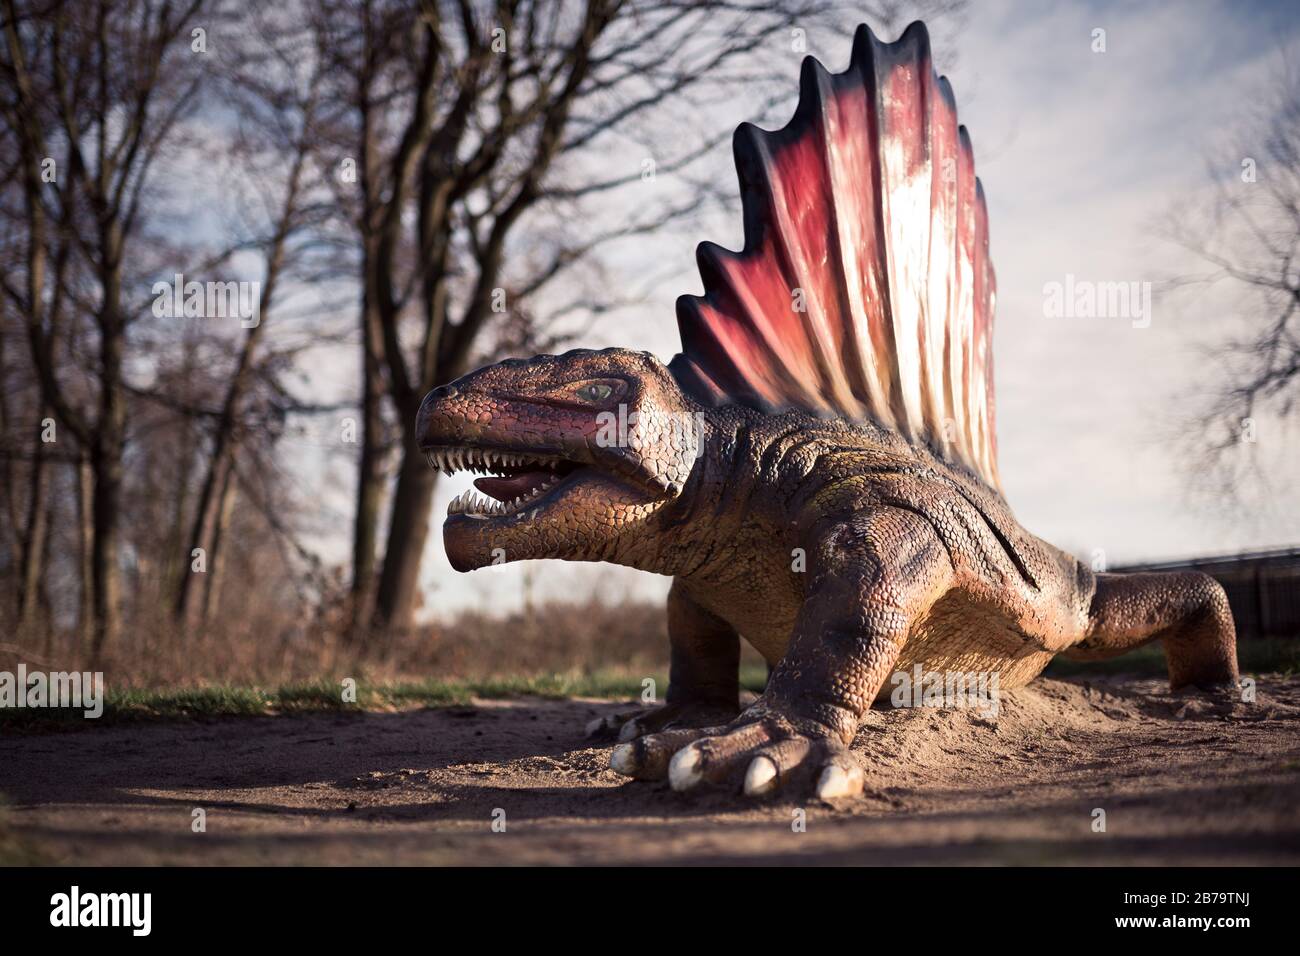 LUBIN, POLAND - DECEMBER 11, 2017 - Realistic model of dinosaur Dimetrodon angelensis in Park Wroclawski. Park is well known tourist attraction for ch Stock Photo